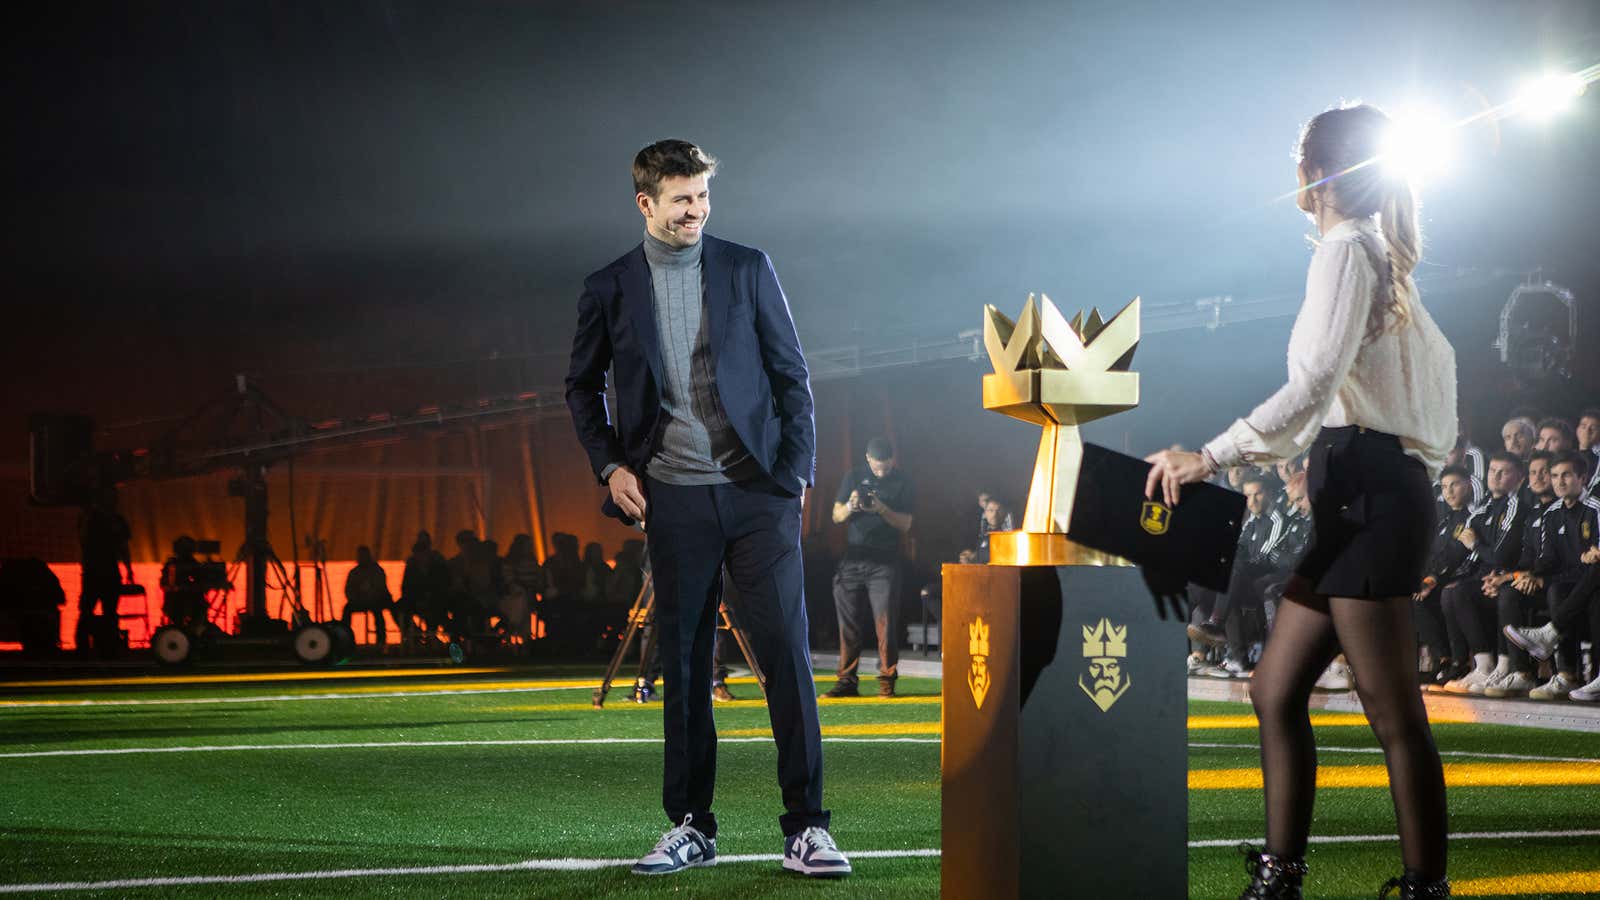 Inside the Kings League, Gerard Piqué's Soccer Circus on Twitch